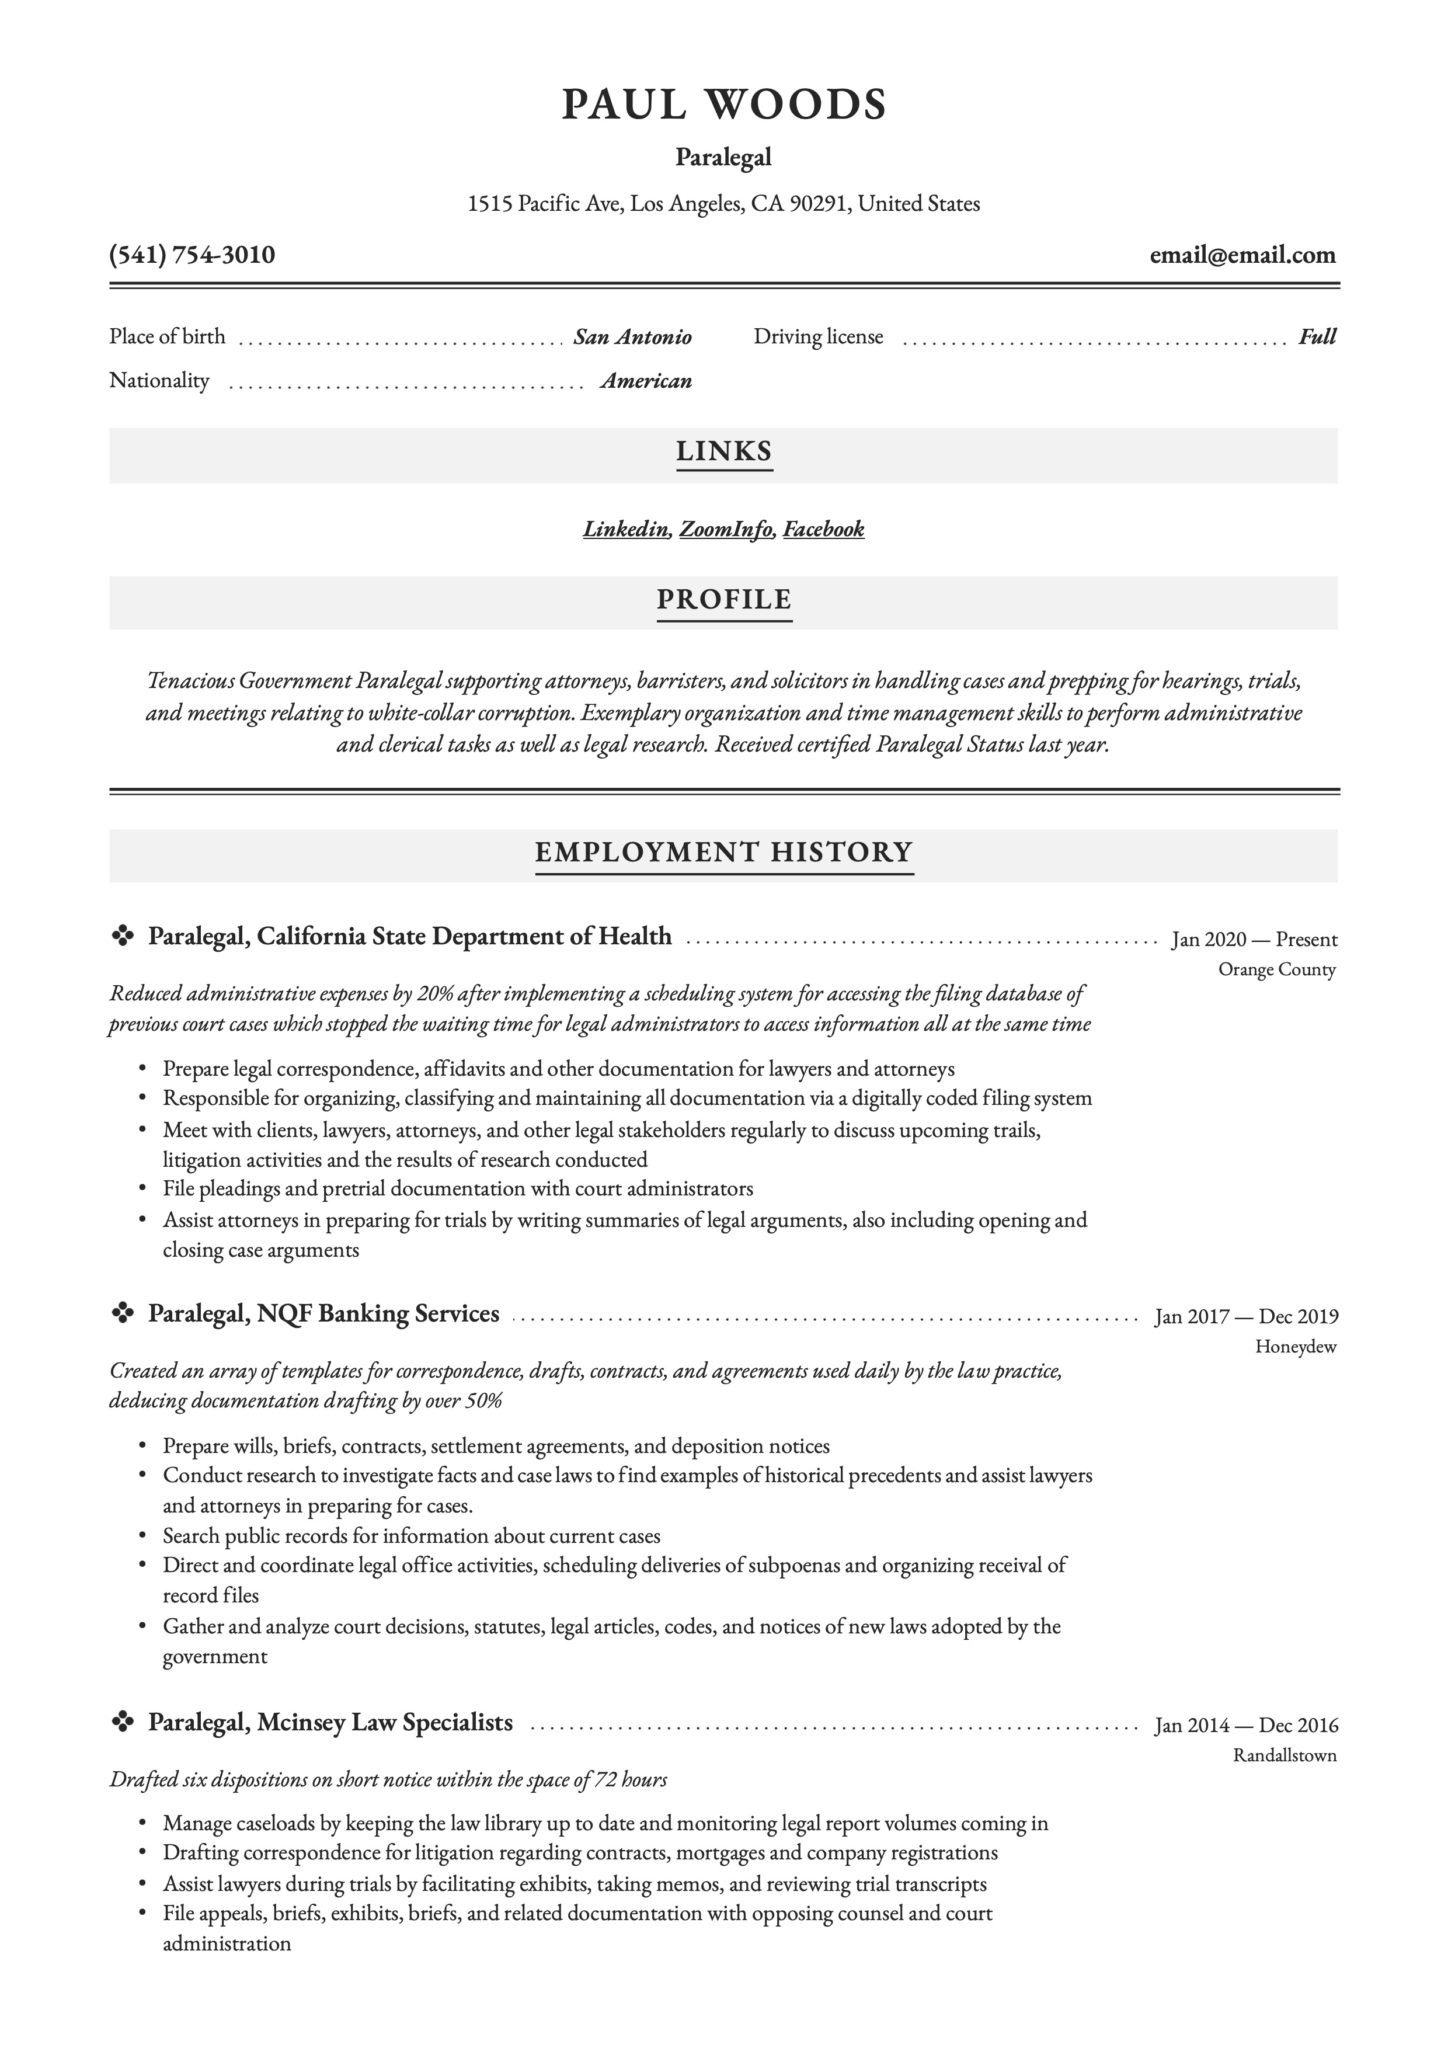 Sample Real Estate Paralegal Resumes Residential 19 Paralegal Resume Examples & Guide Pdf 2020 Free